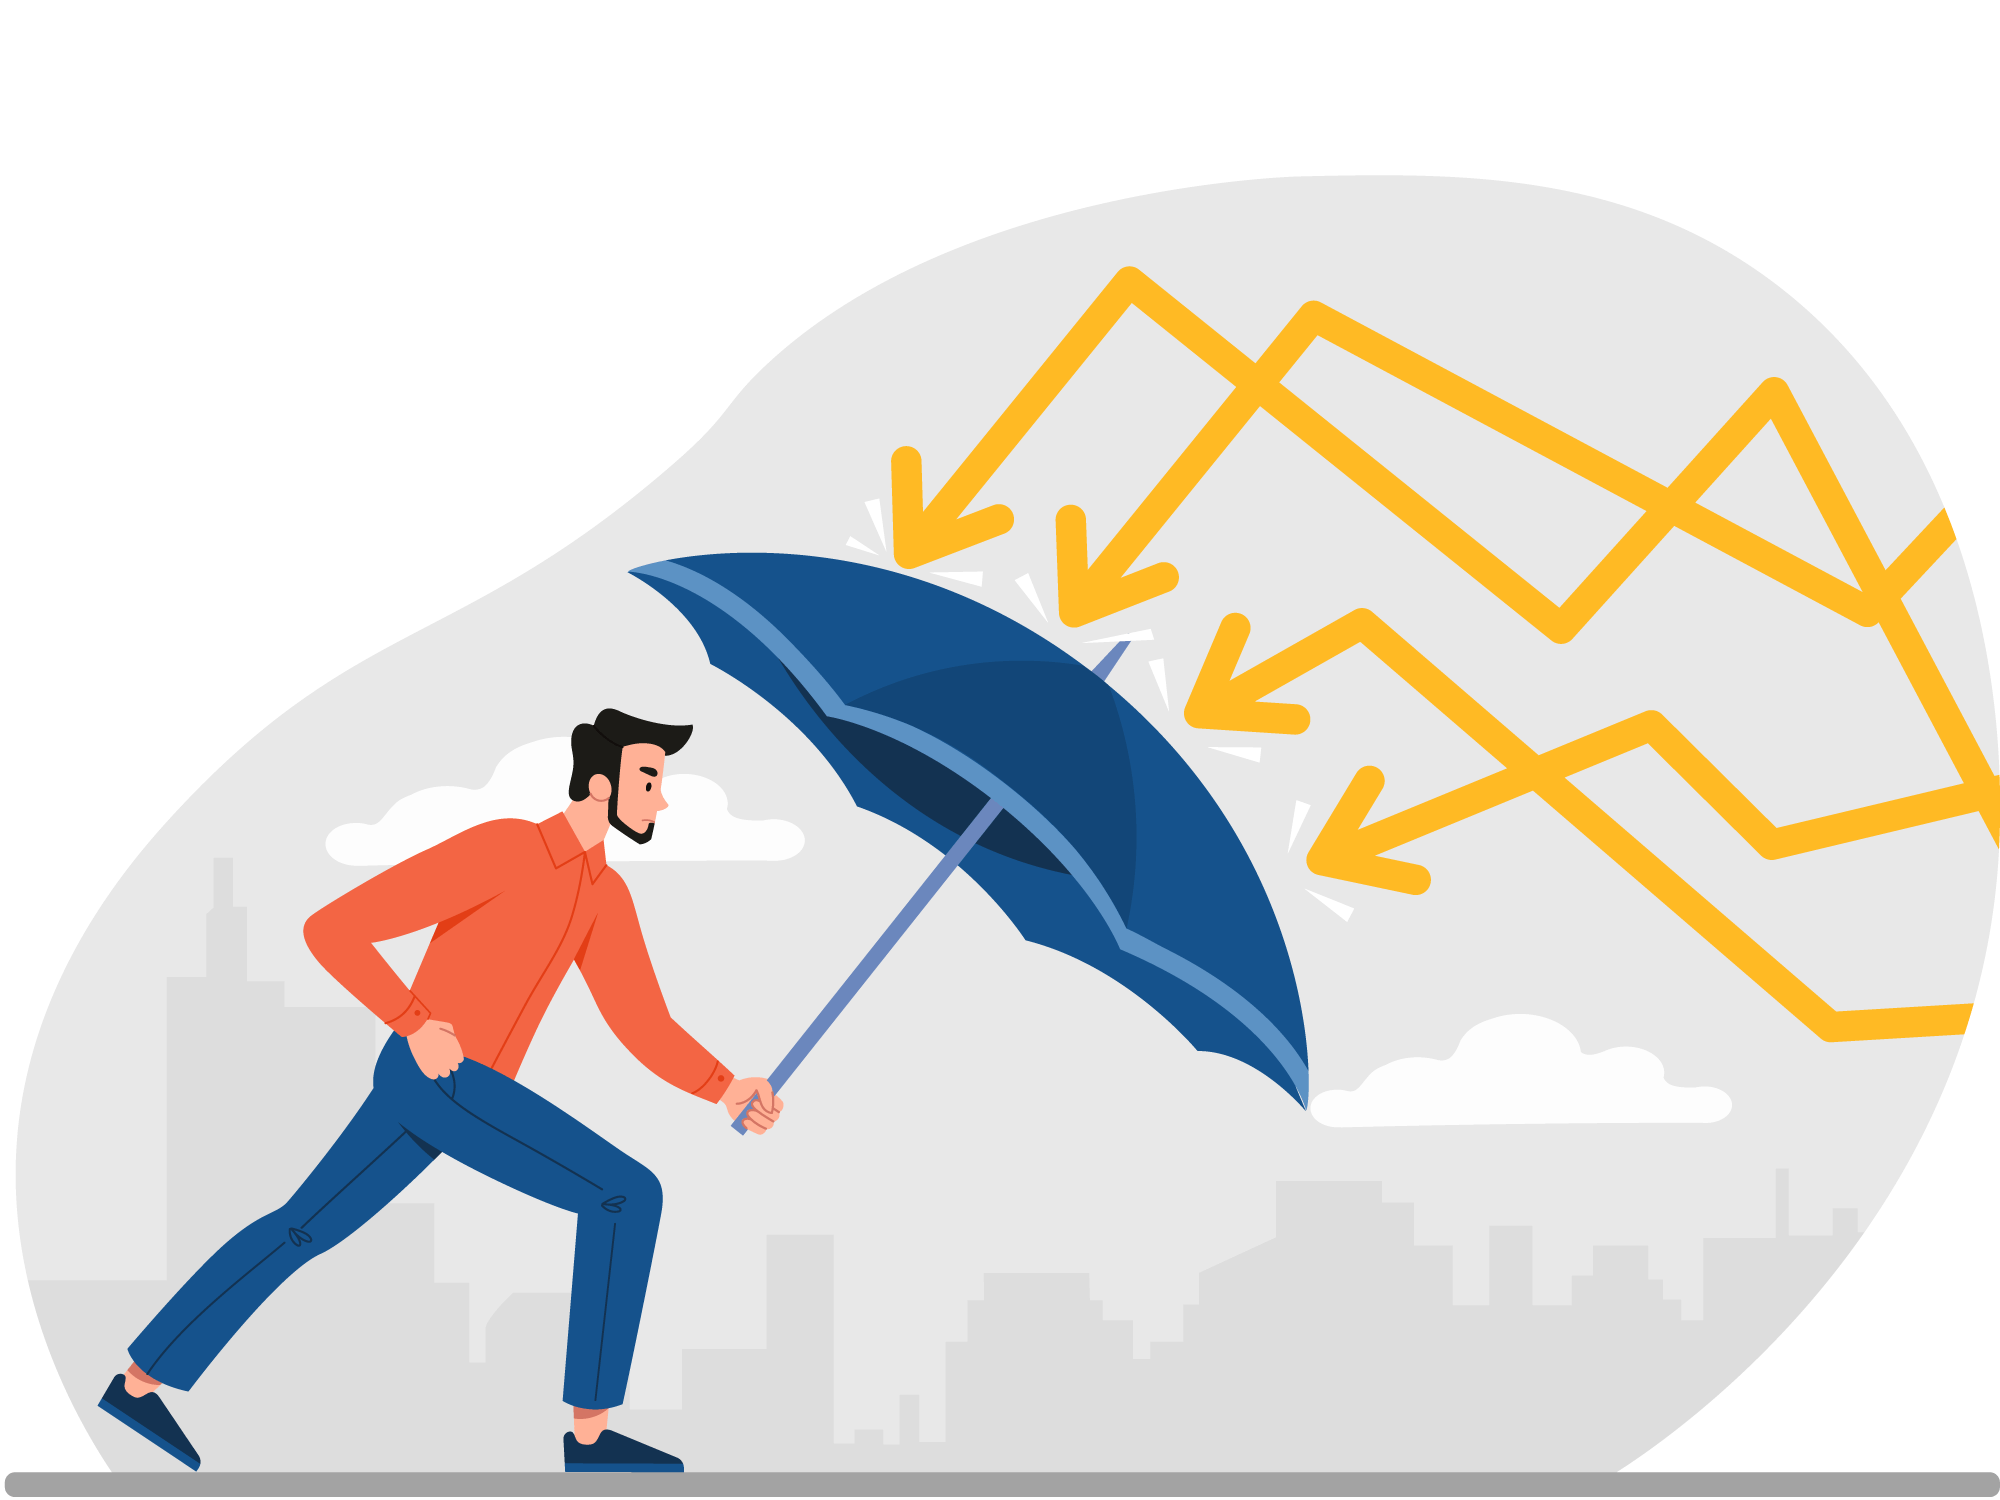 Illustration of man holding back zig-zagging arrows with an umbrella against a cityscape background.